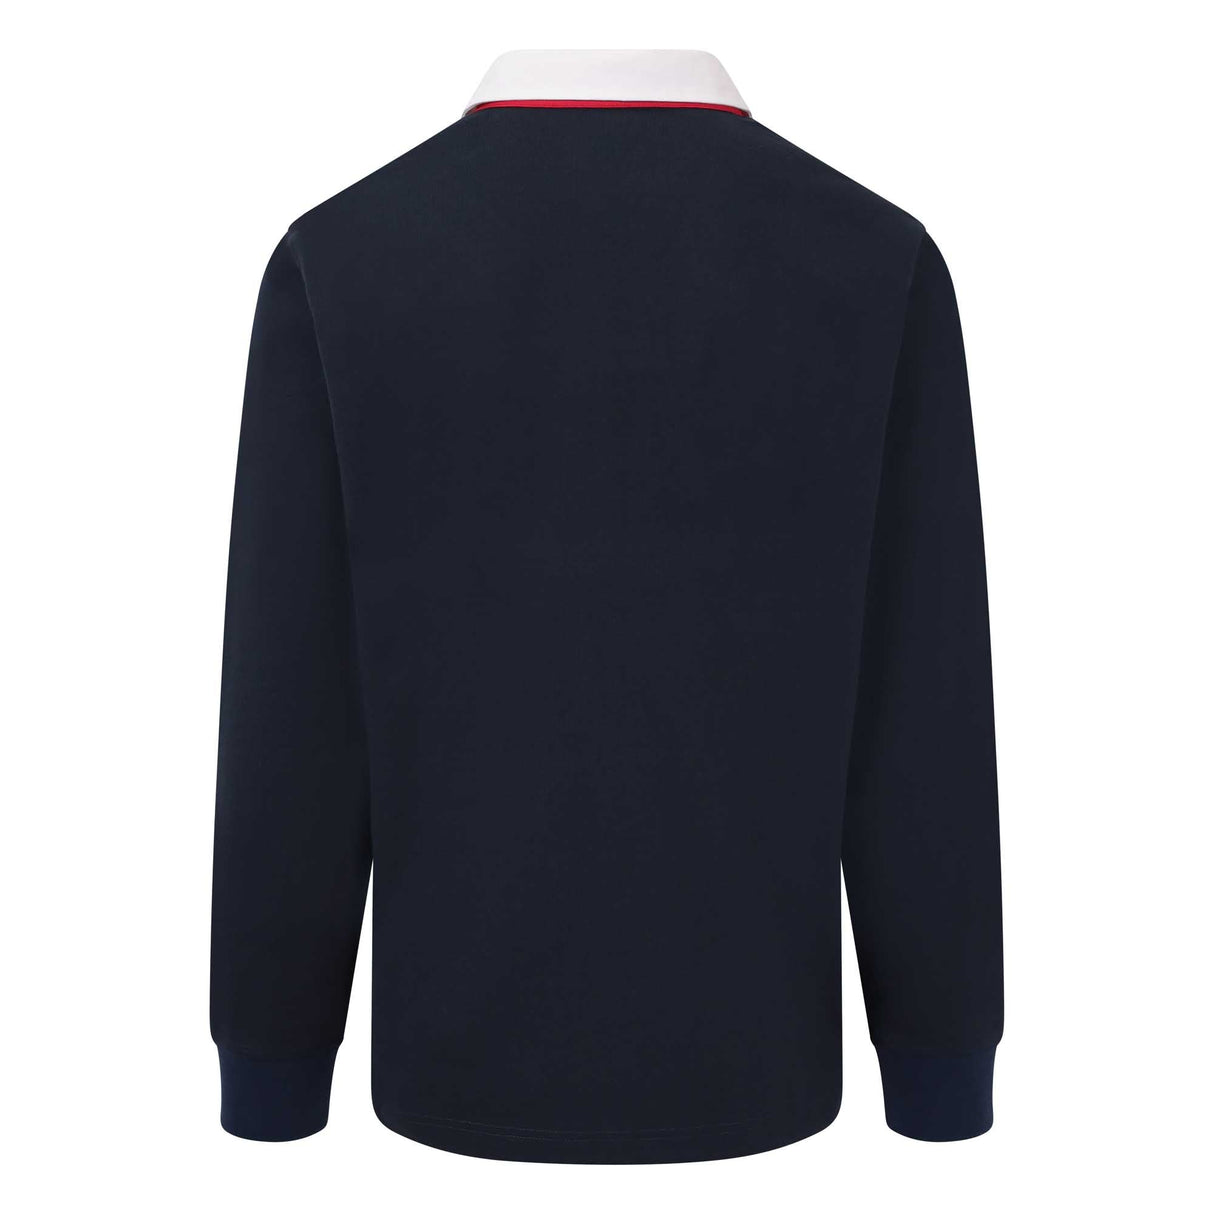 20 Unions L/S Stripe Rugby - Navy |Rugby | 20 Unions | Absolute Rugby